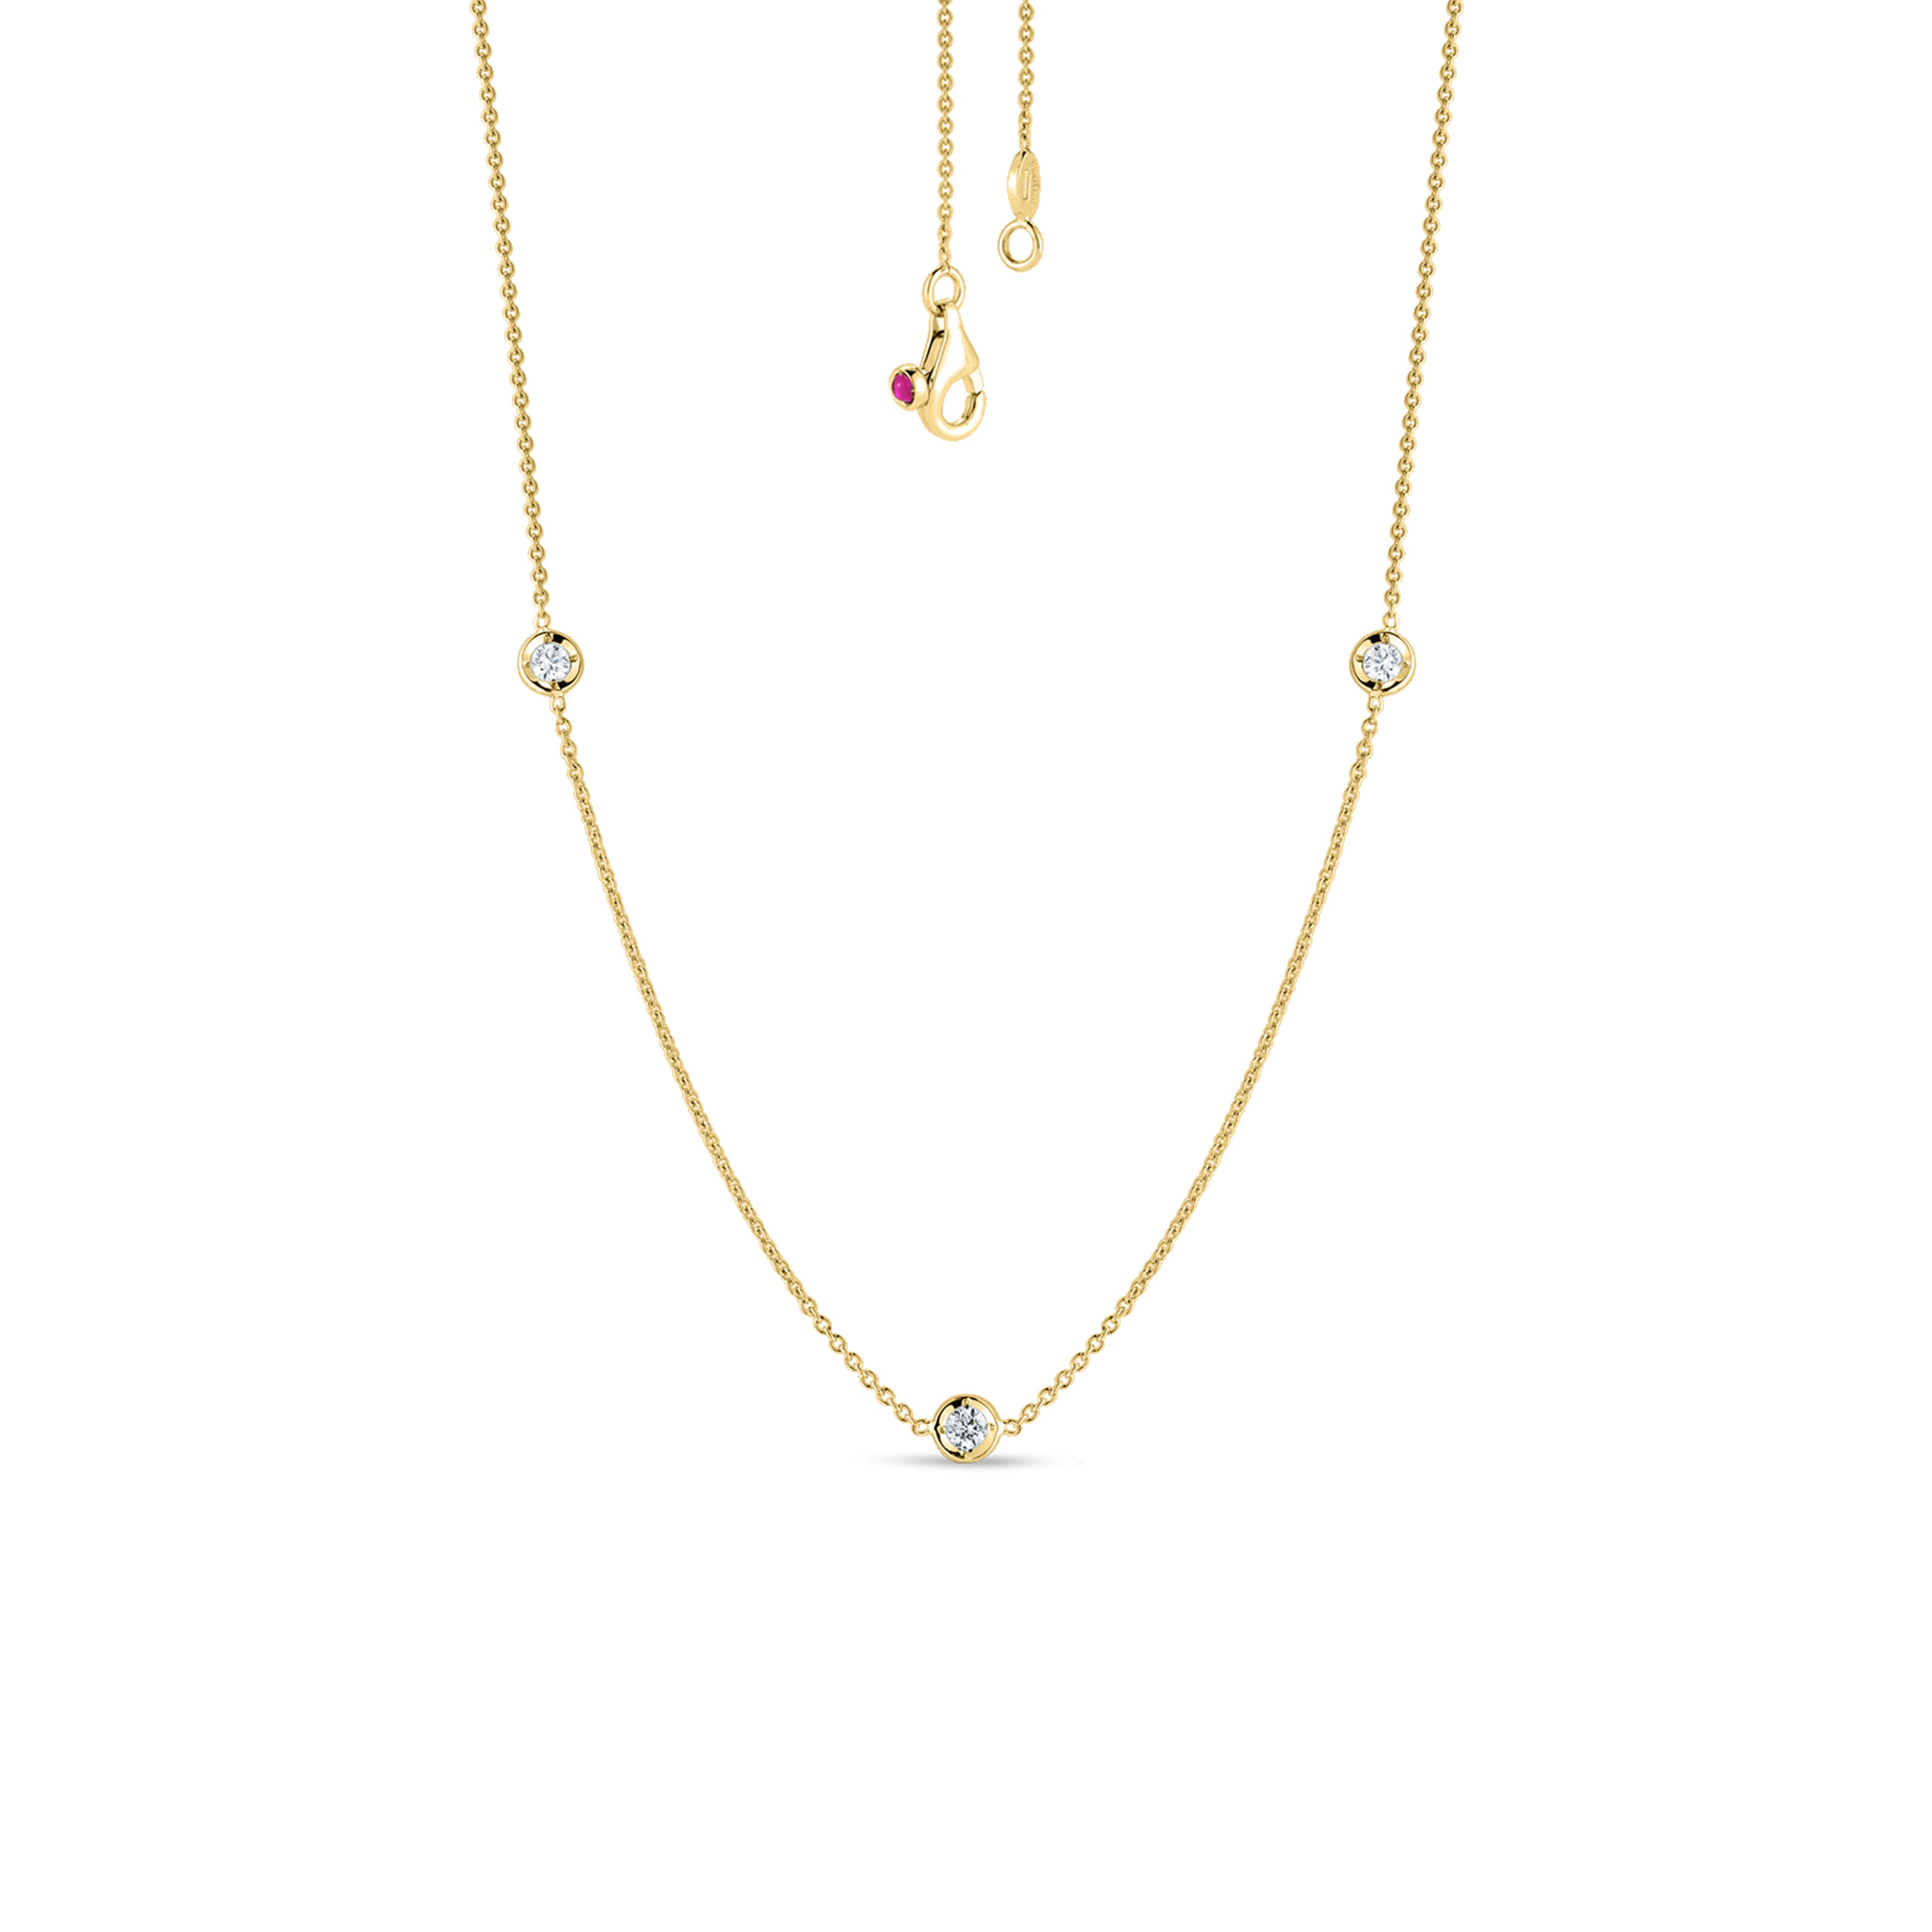 18K Yellow Gold Roberto Coin 3 Station Diamond Necklace